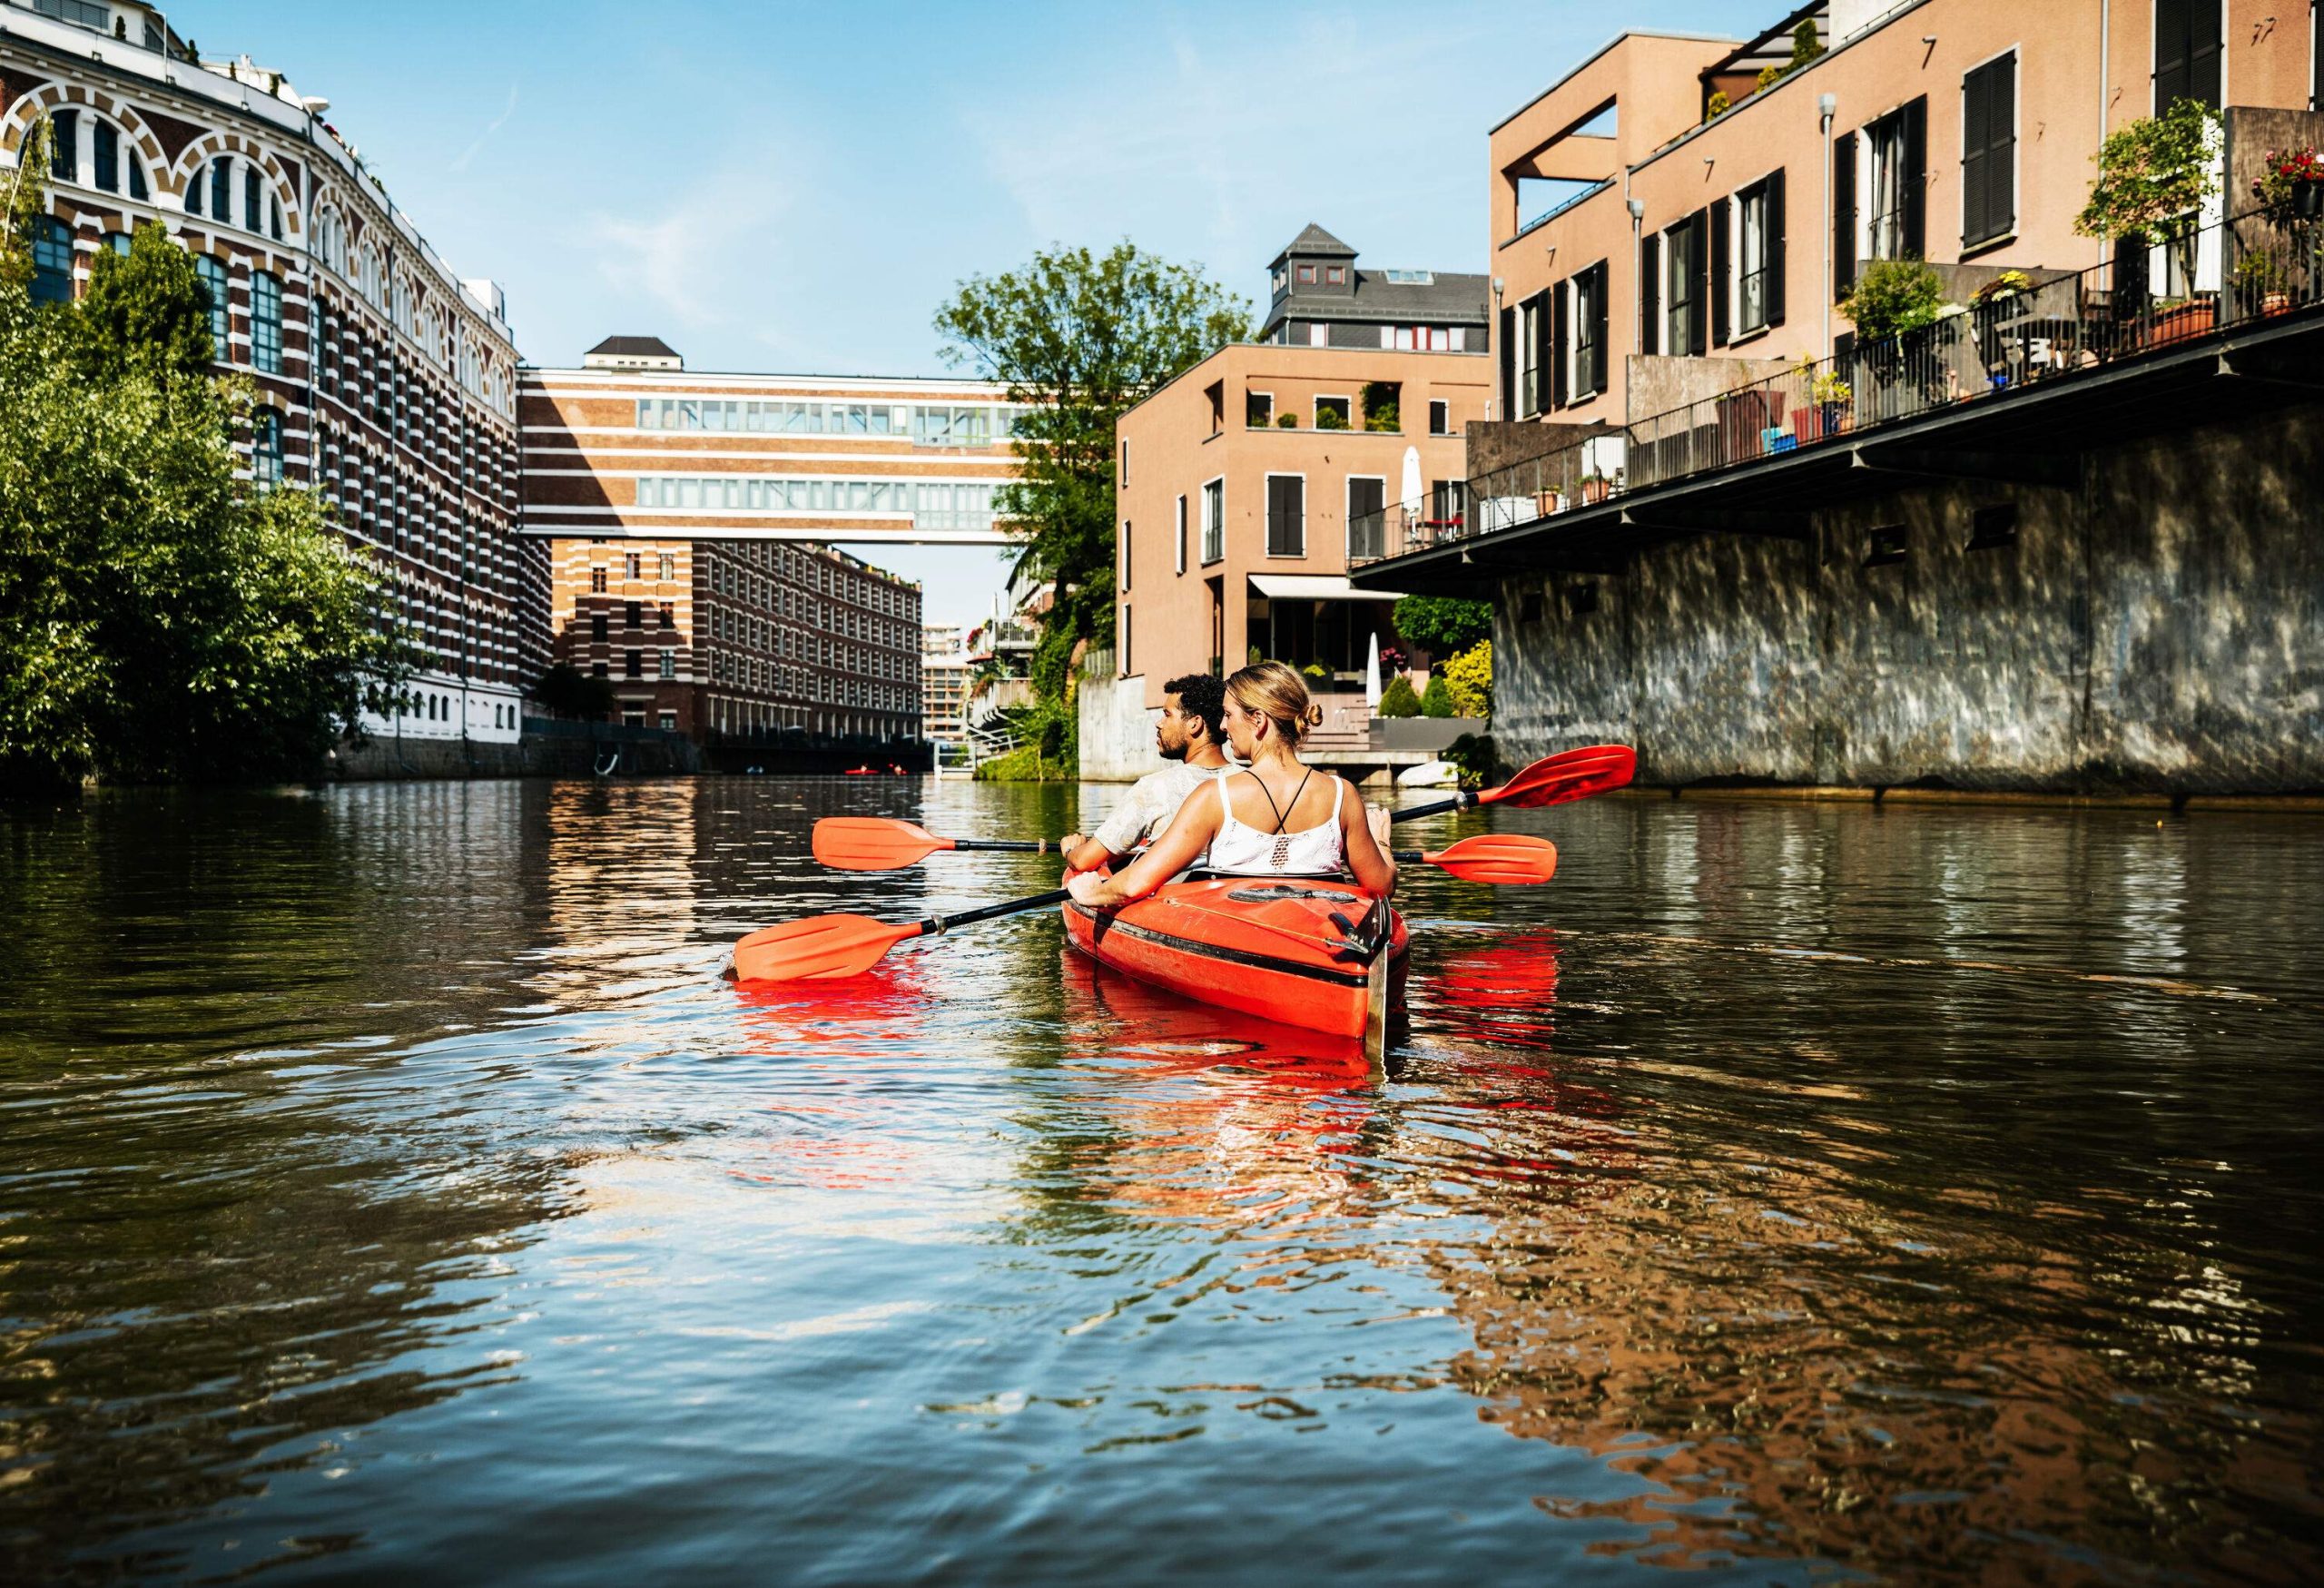 A couple in a kayak paddling on the tranquil canal flanked by classic buildings.